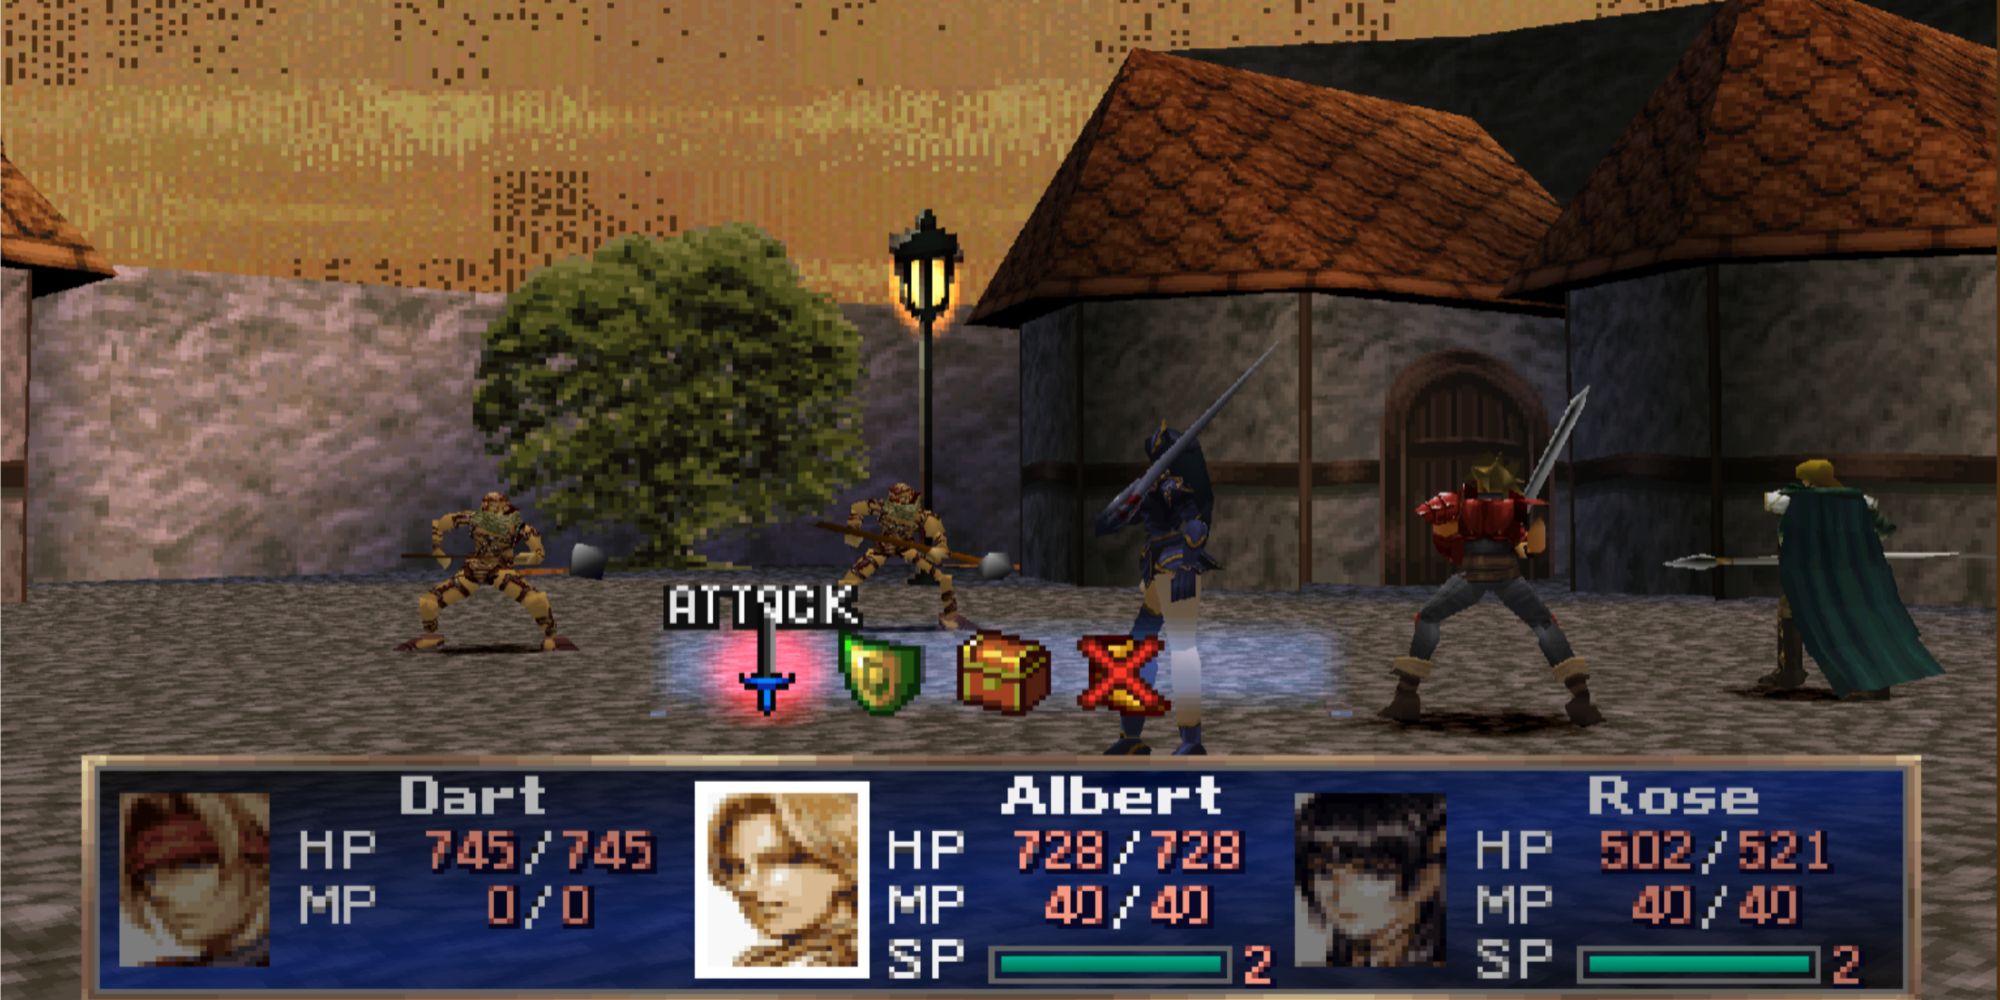 Albert can buff the party's defense